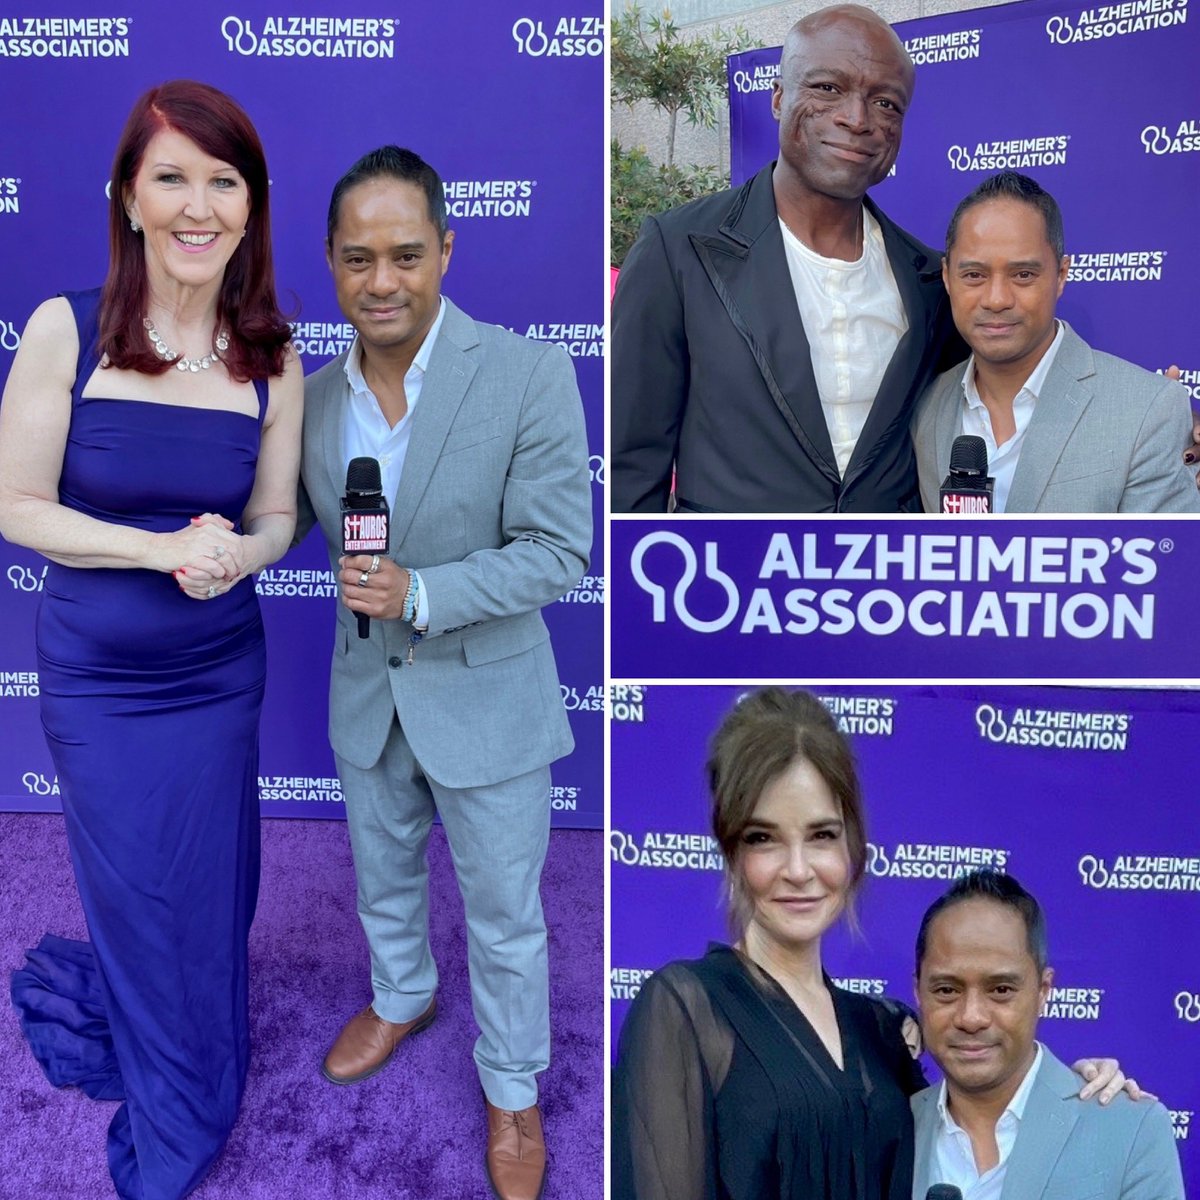 From Stars from TV’s Hit Show; #TheOffice, to (#GrammyAward Winning MusicArtist) @Seal, to #BreakingBad’s @betsy_brandt, to SoManyMore…, ‘Twas a #BlessedHonor & #FunTime this weekend, covering the @alzassociation’s #PurpleSpringGala #TheMagicOfMusic Event!m.facebook.com/story.php?stor…